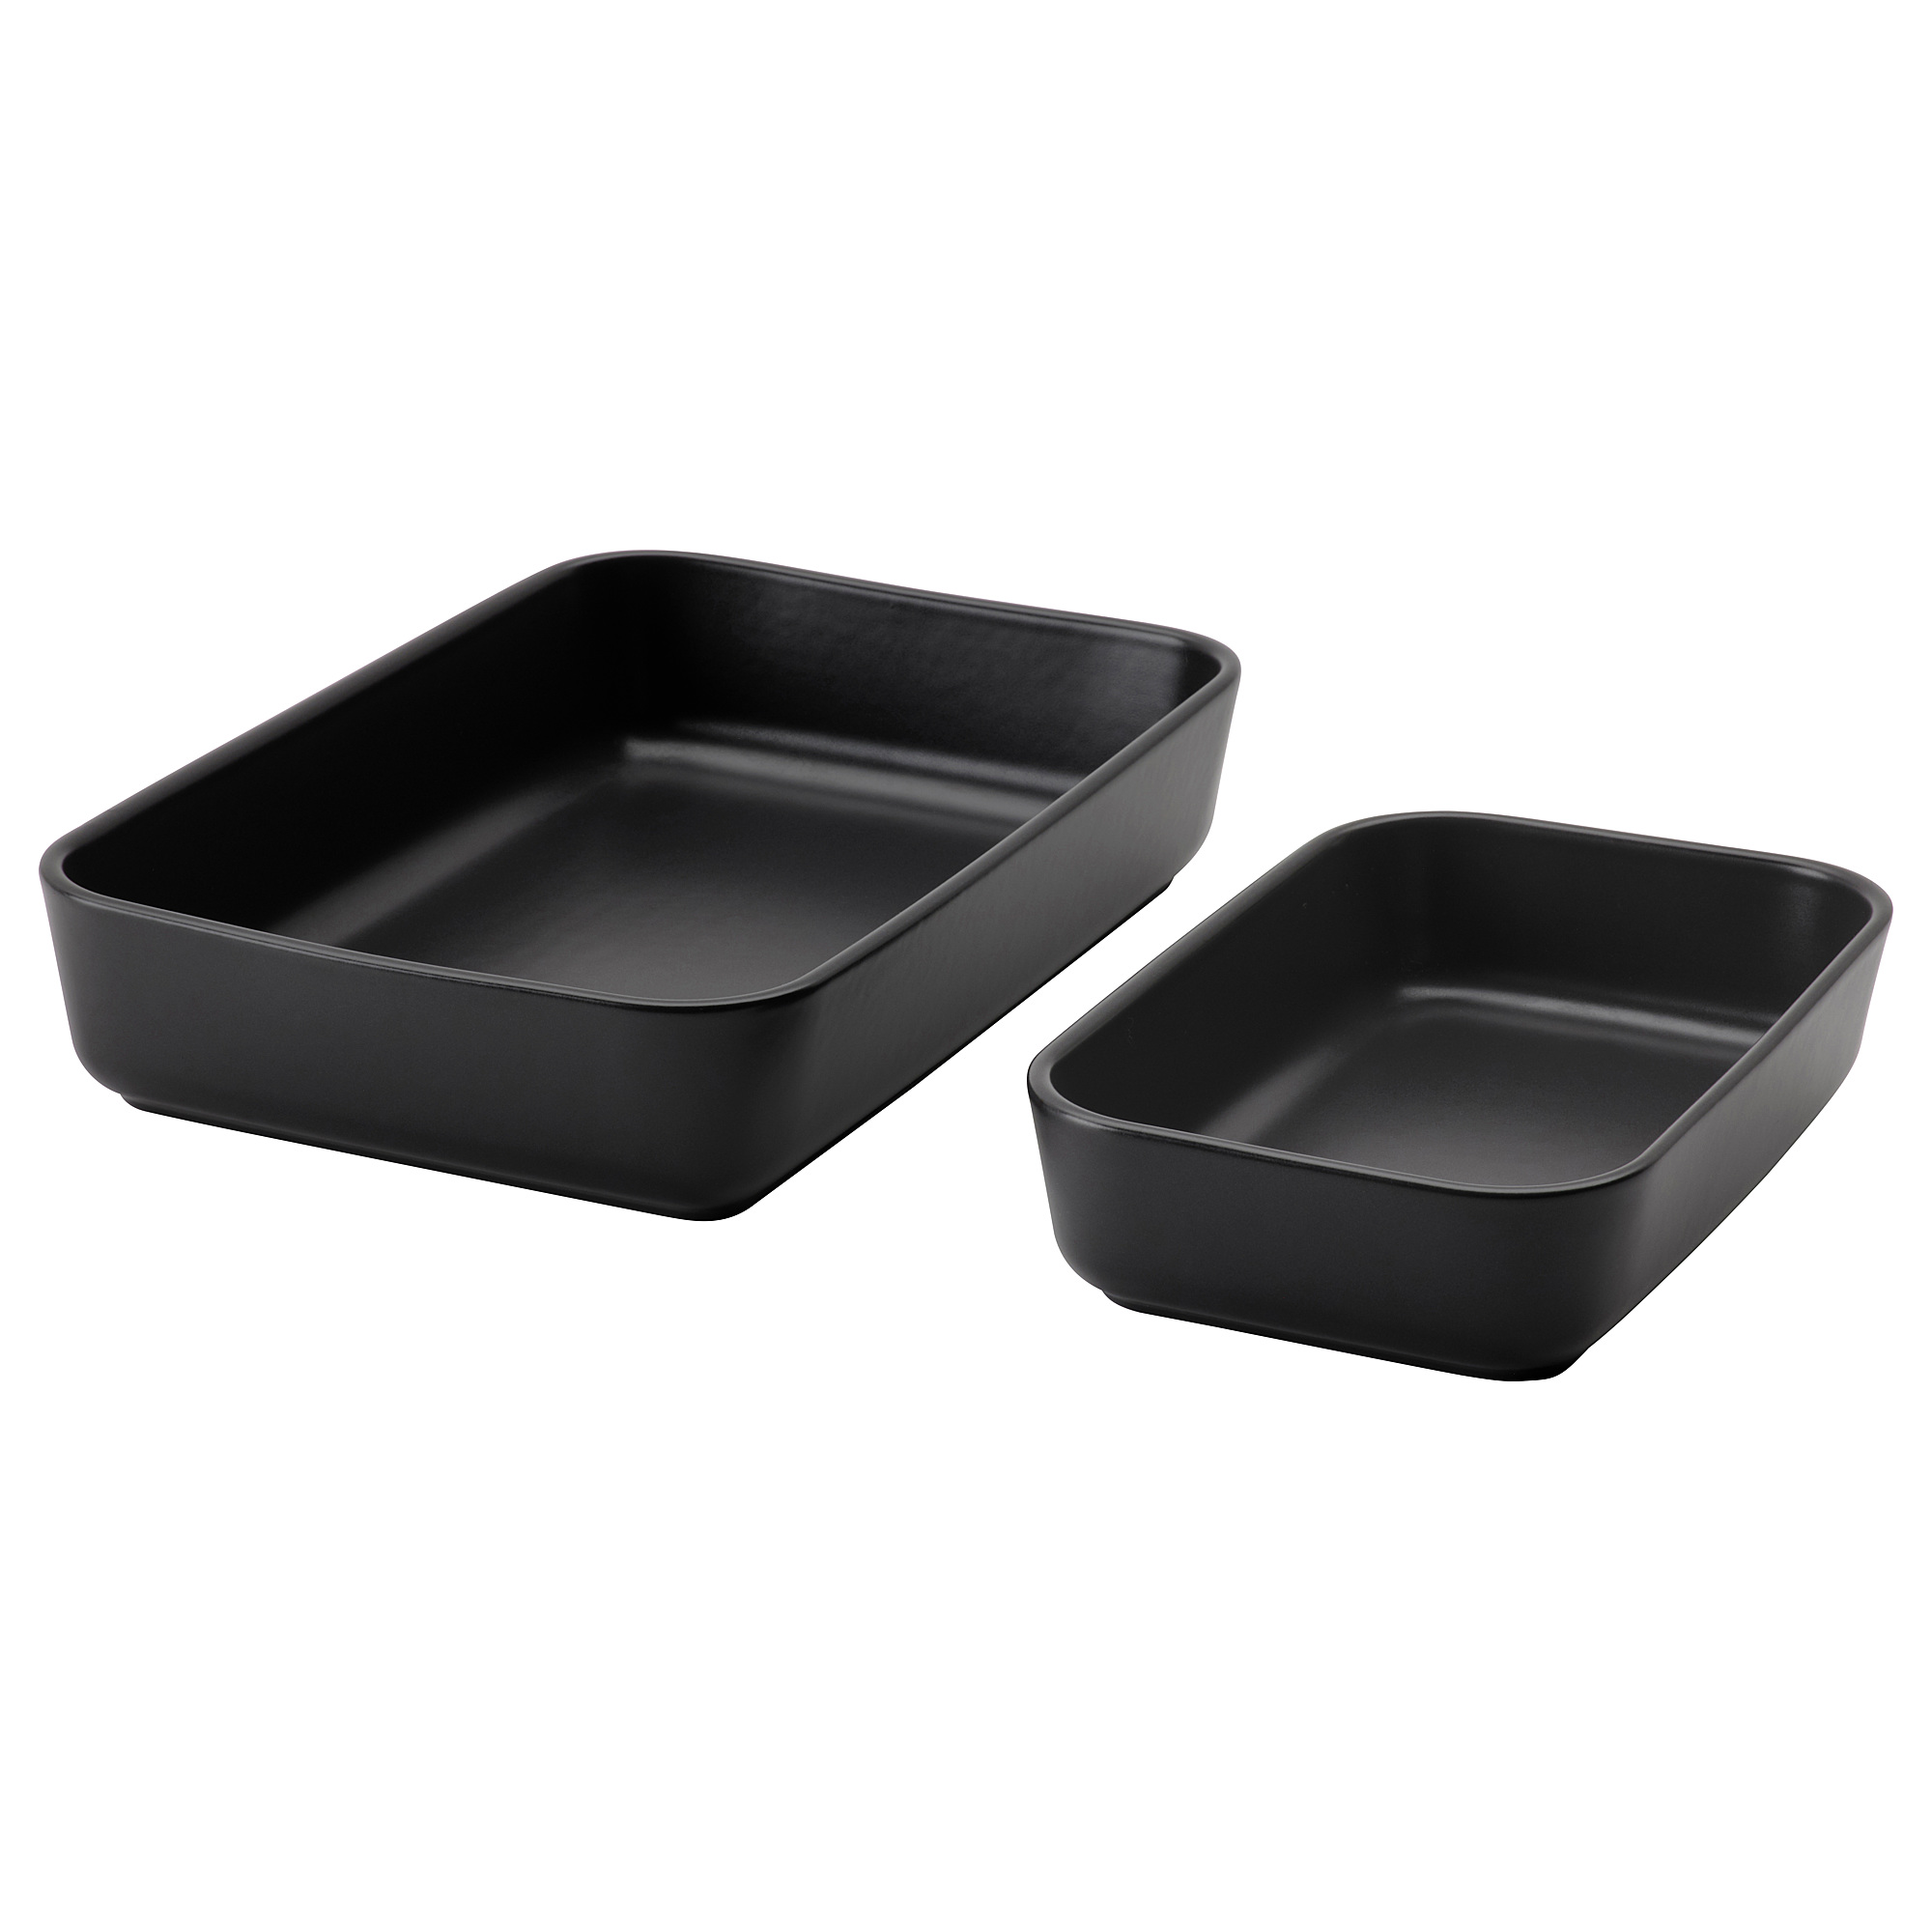 LYCKAD oven/serving dish set of 2